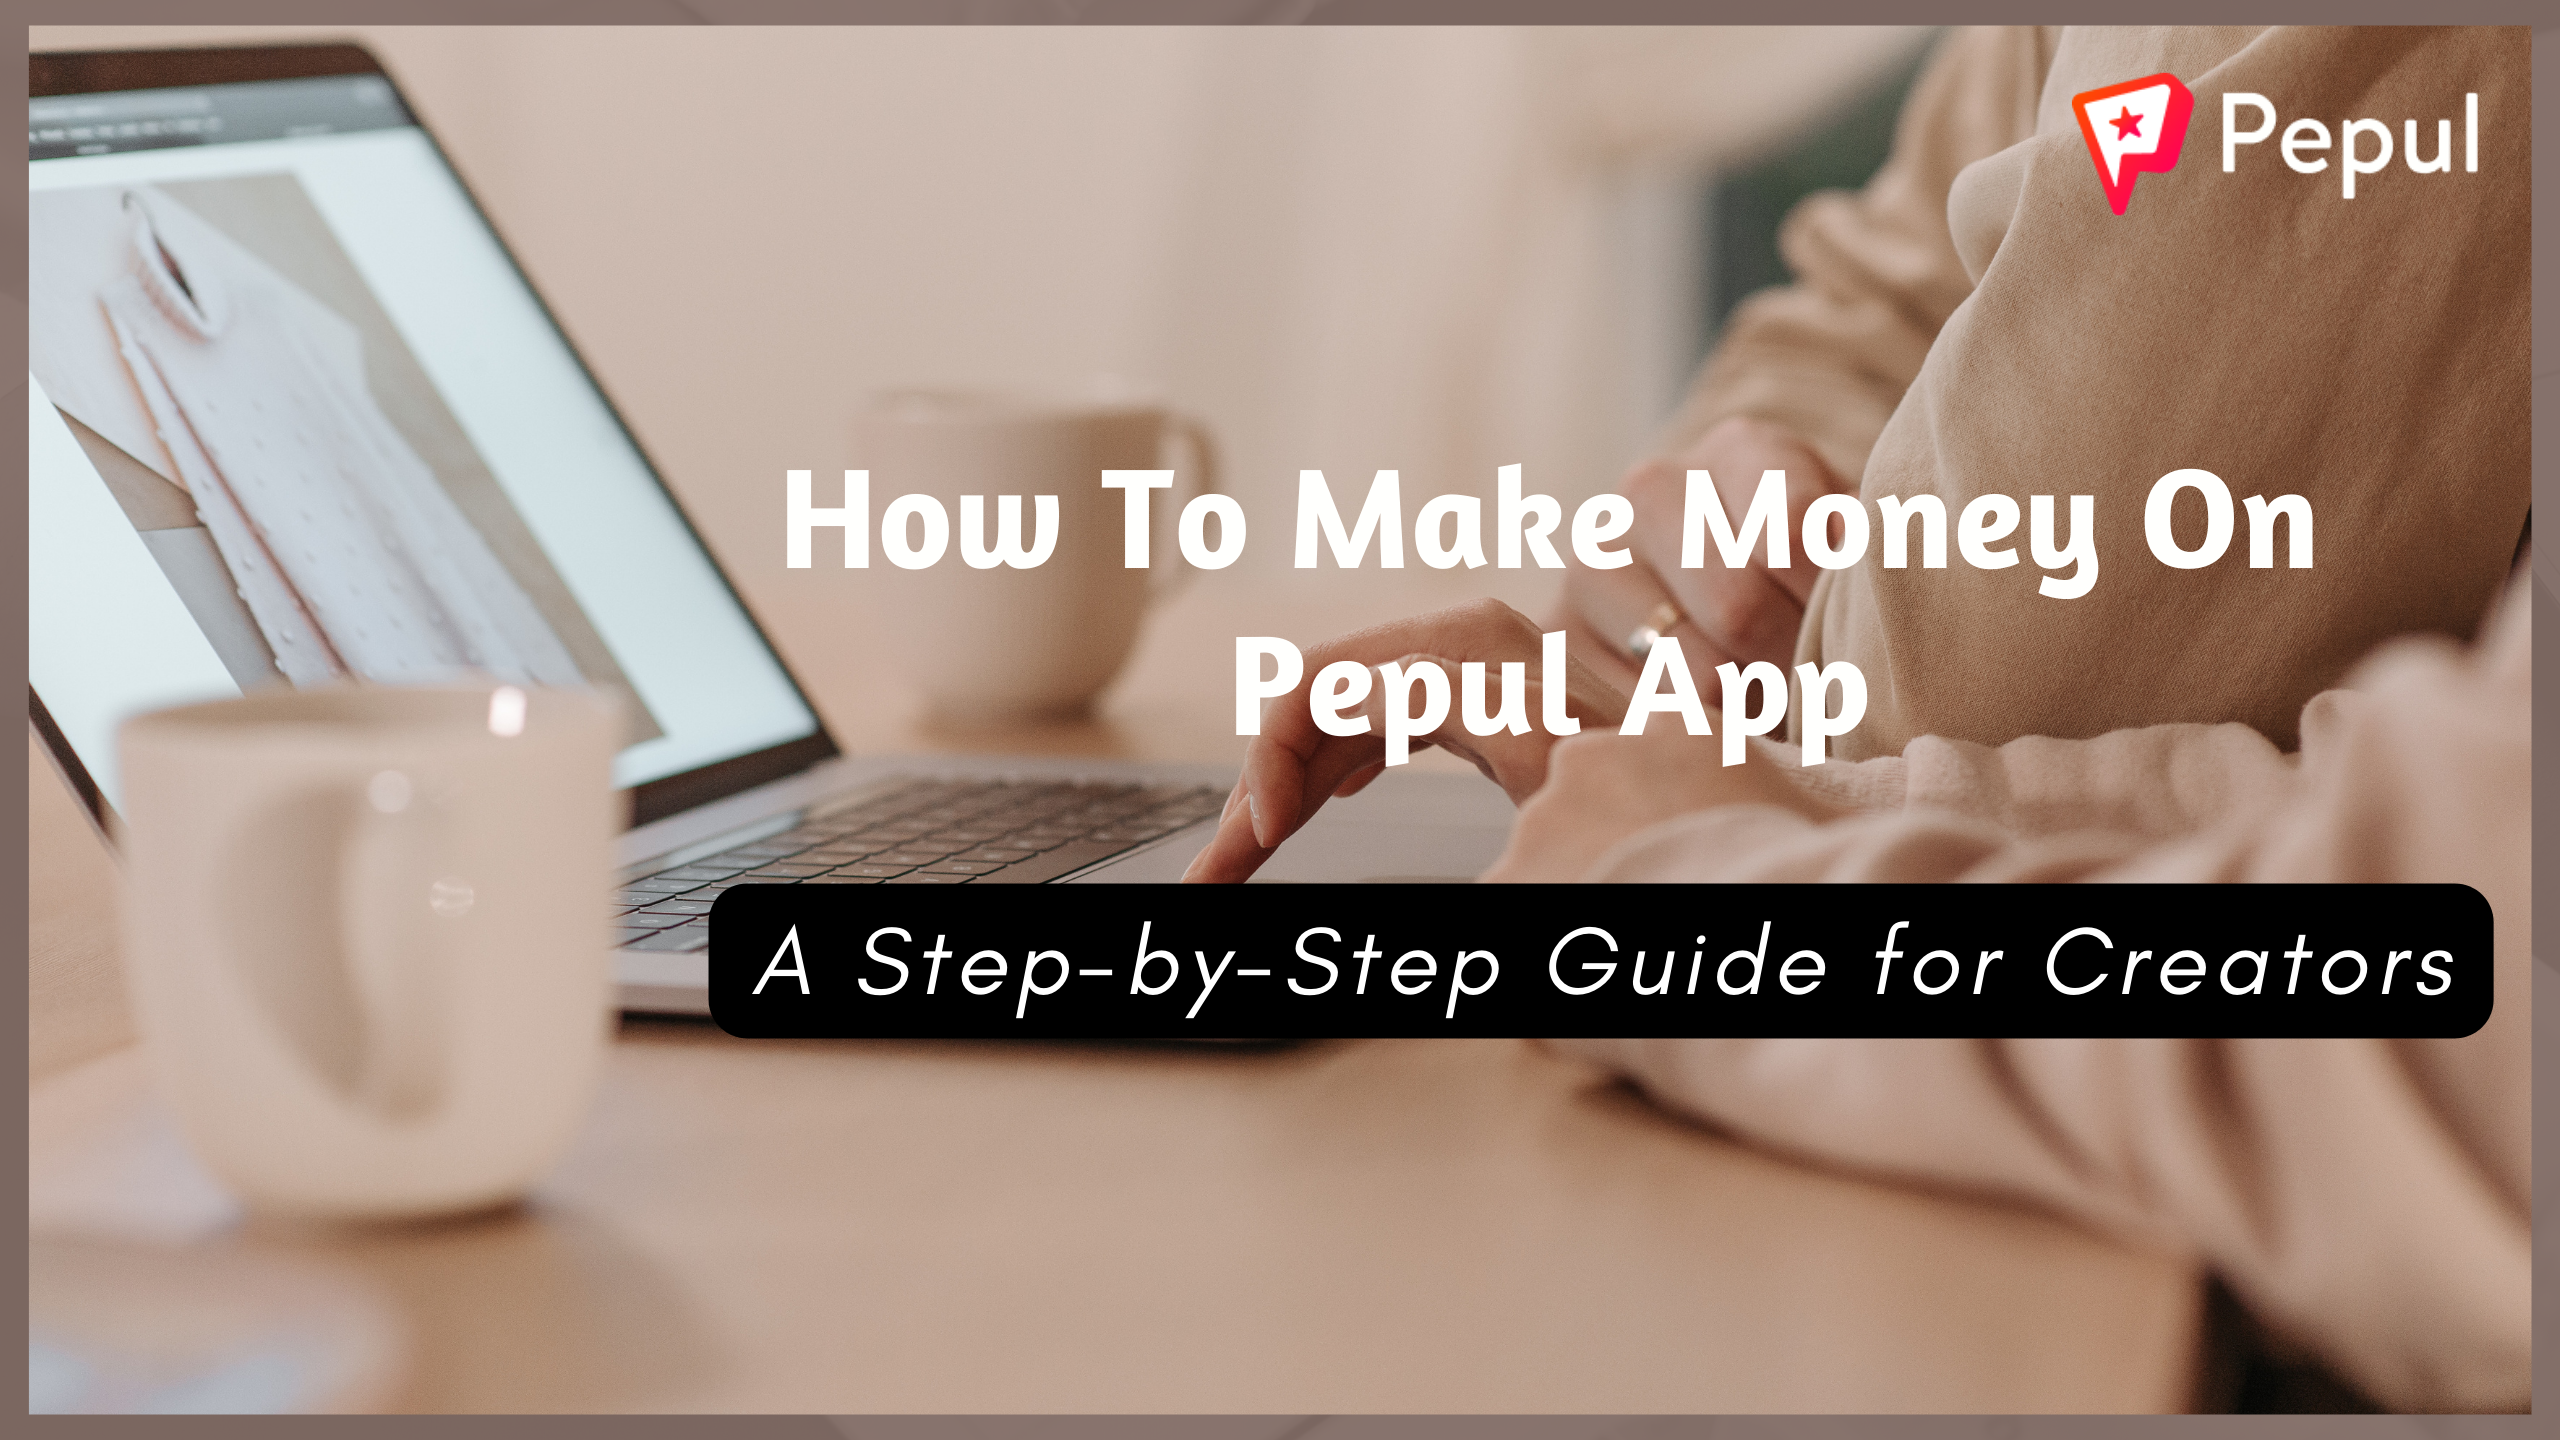 how to make money on Pepul app - A step-by-step guide for creators